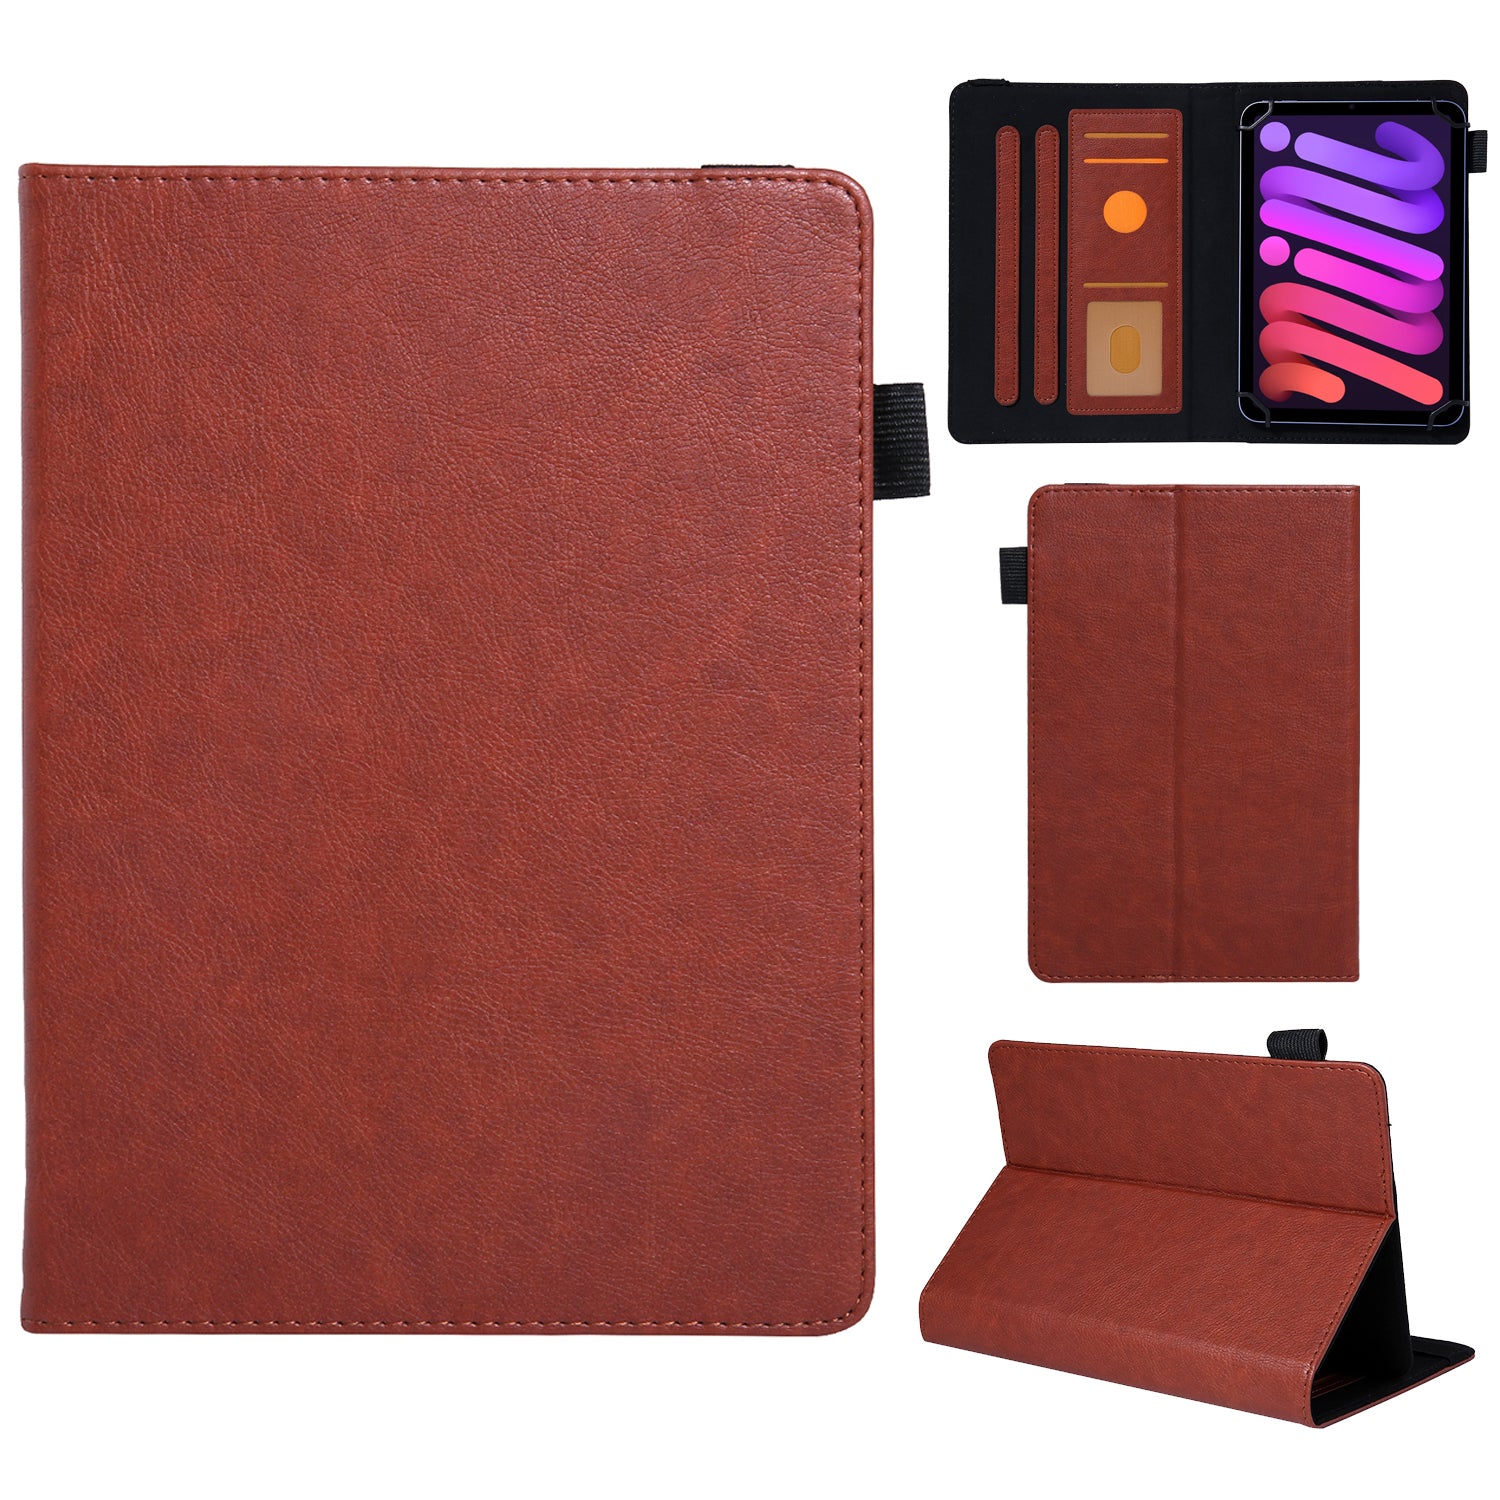 7-inch Tablet Leather Case Card Slots Stand Protective Cover - Brown